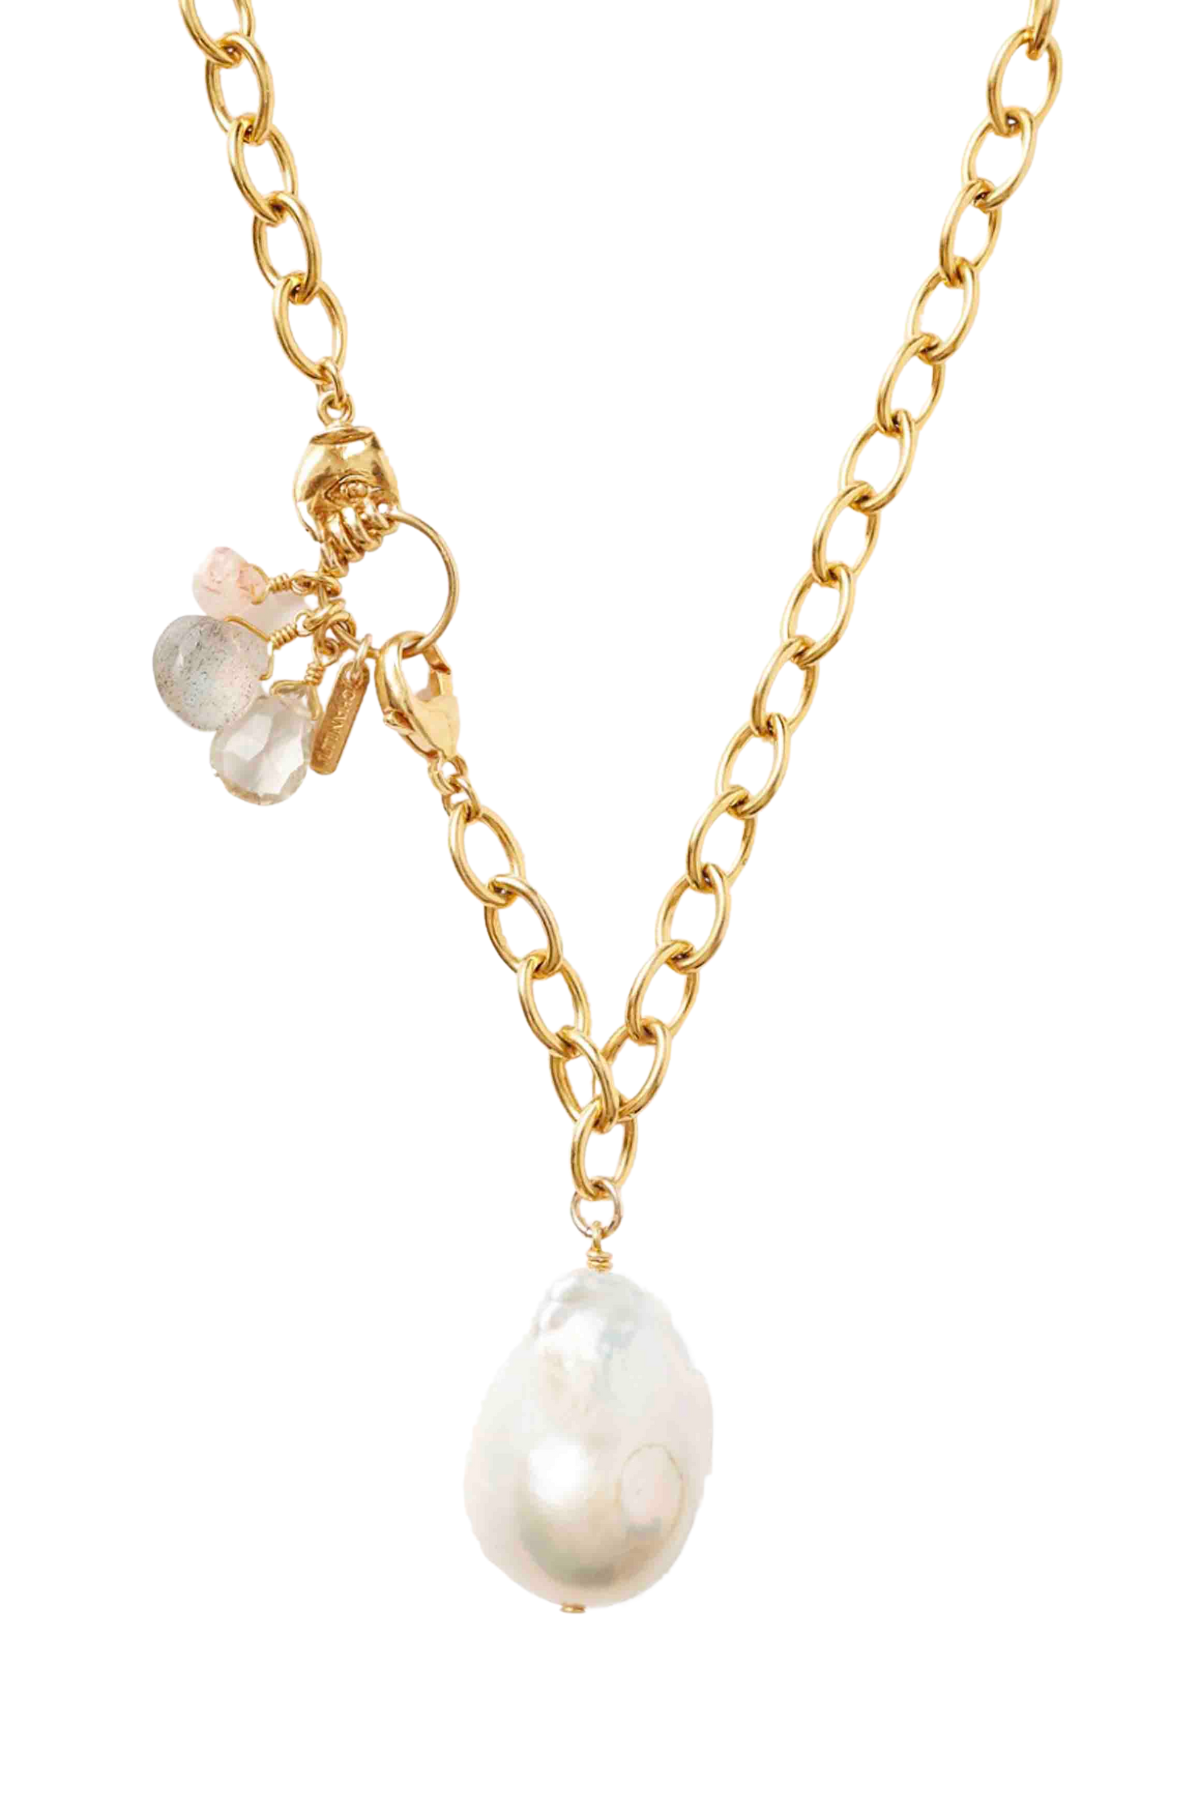 Gold Chain Necklace by Chan Luu with a Freshwater Pearl Drop and a Hand Ring Clasp with 3 different colored Lemon Topaz Drops